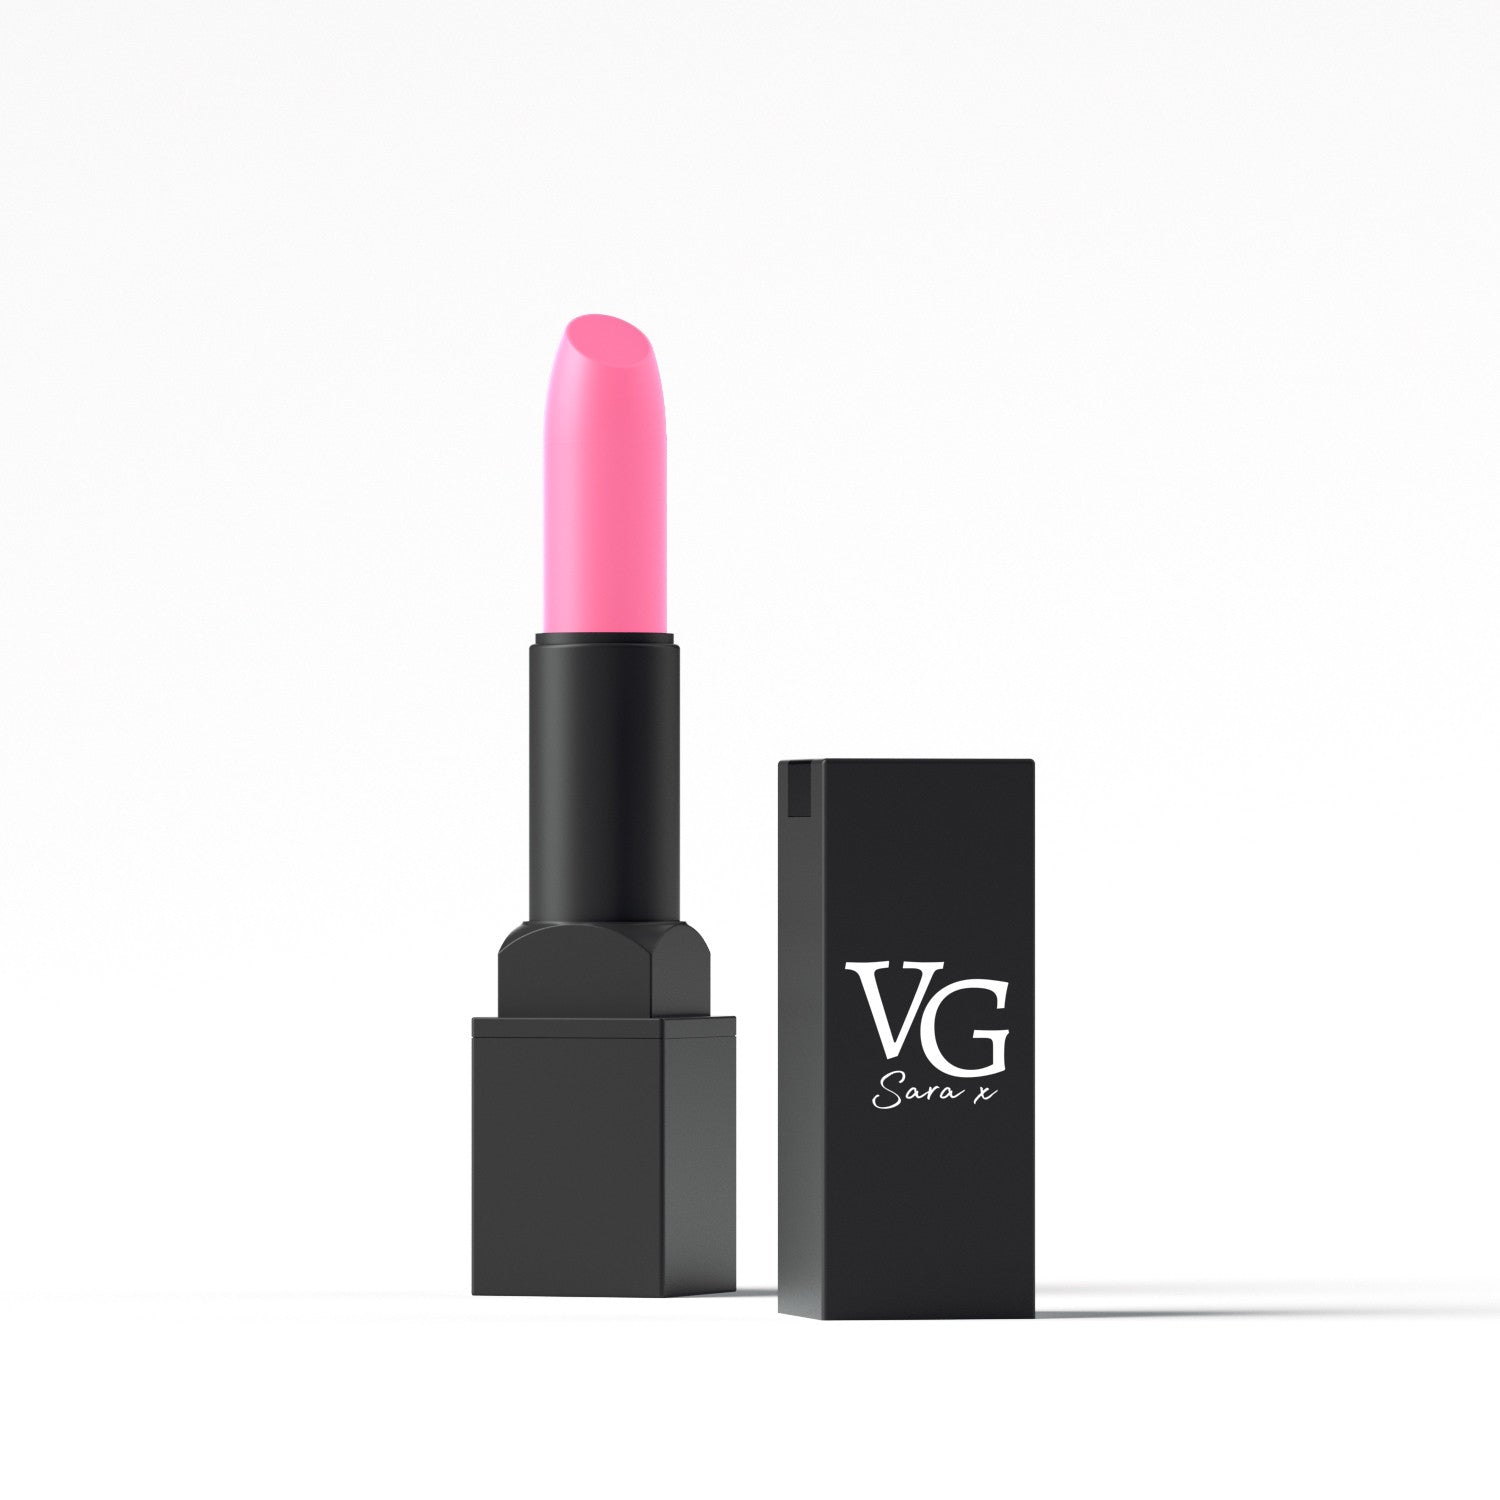 Detailed view of VG Cosmetics pink shade  lipstick with brand imprint